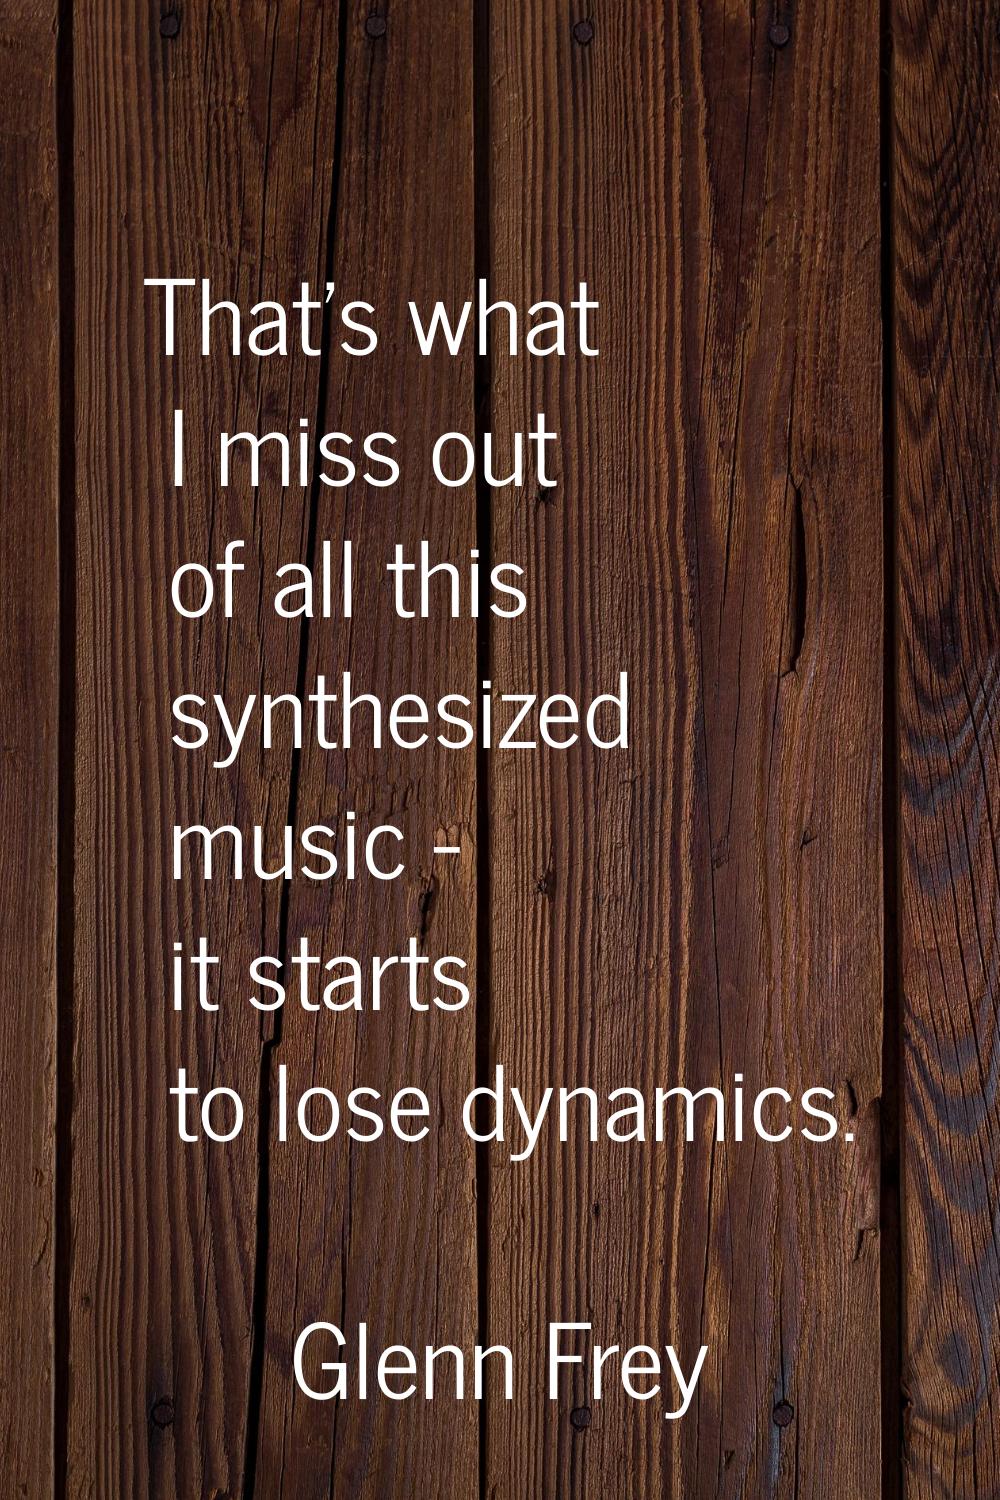 That's what I miss out of all this synthesized music - it starts to lose dynamics.